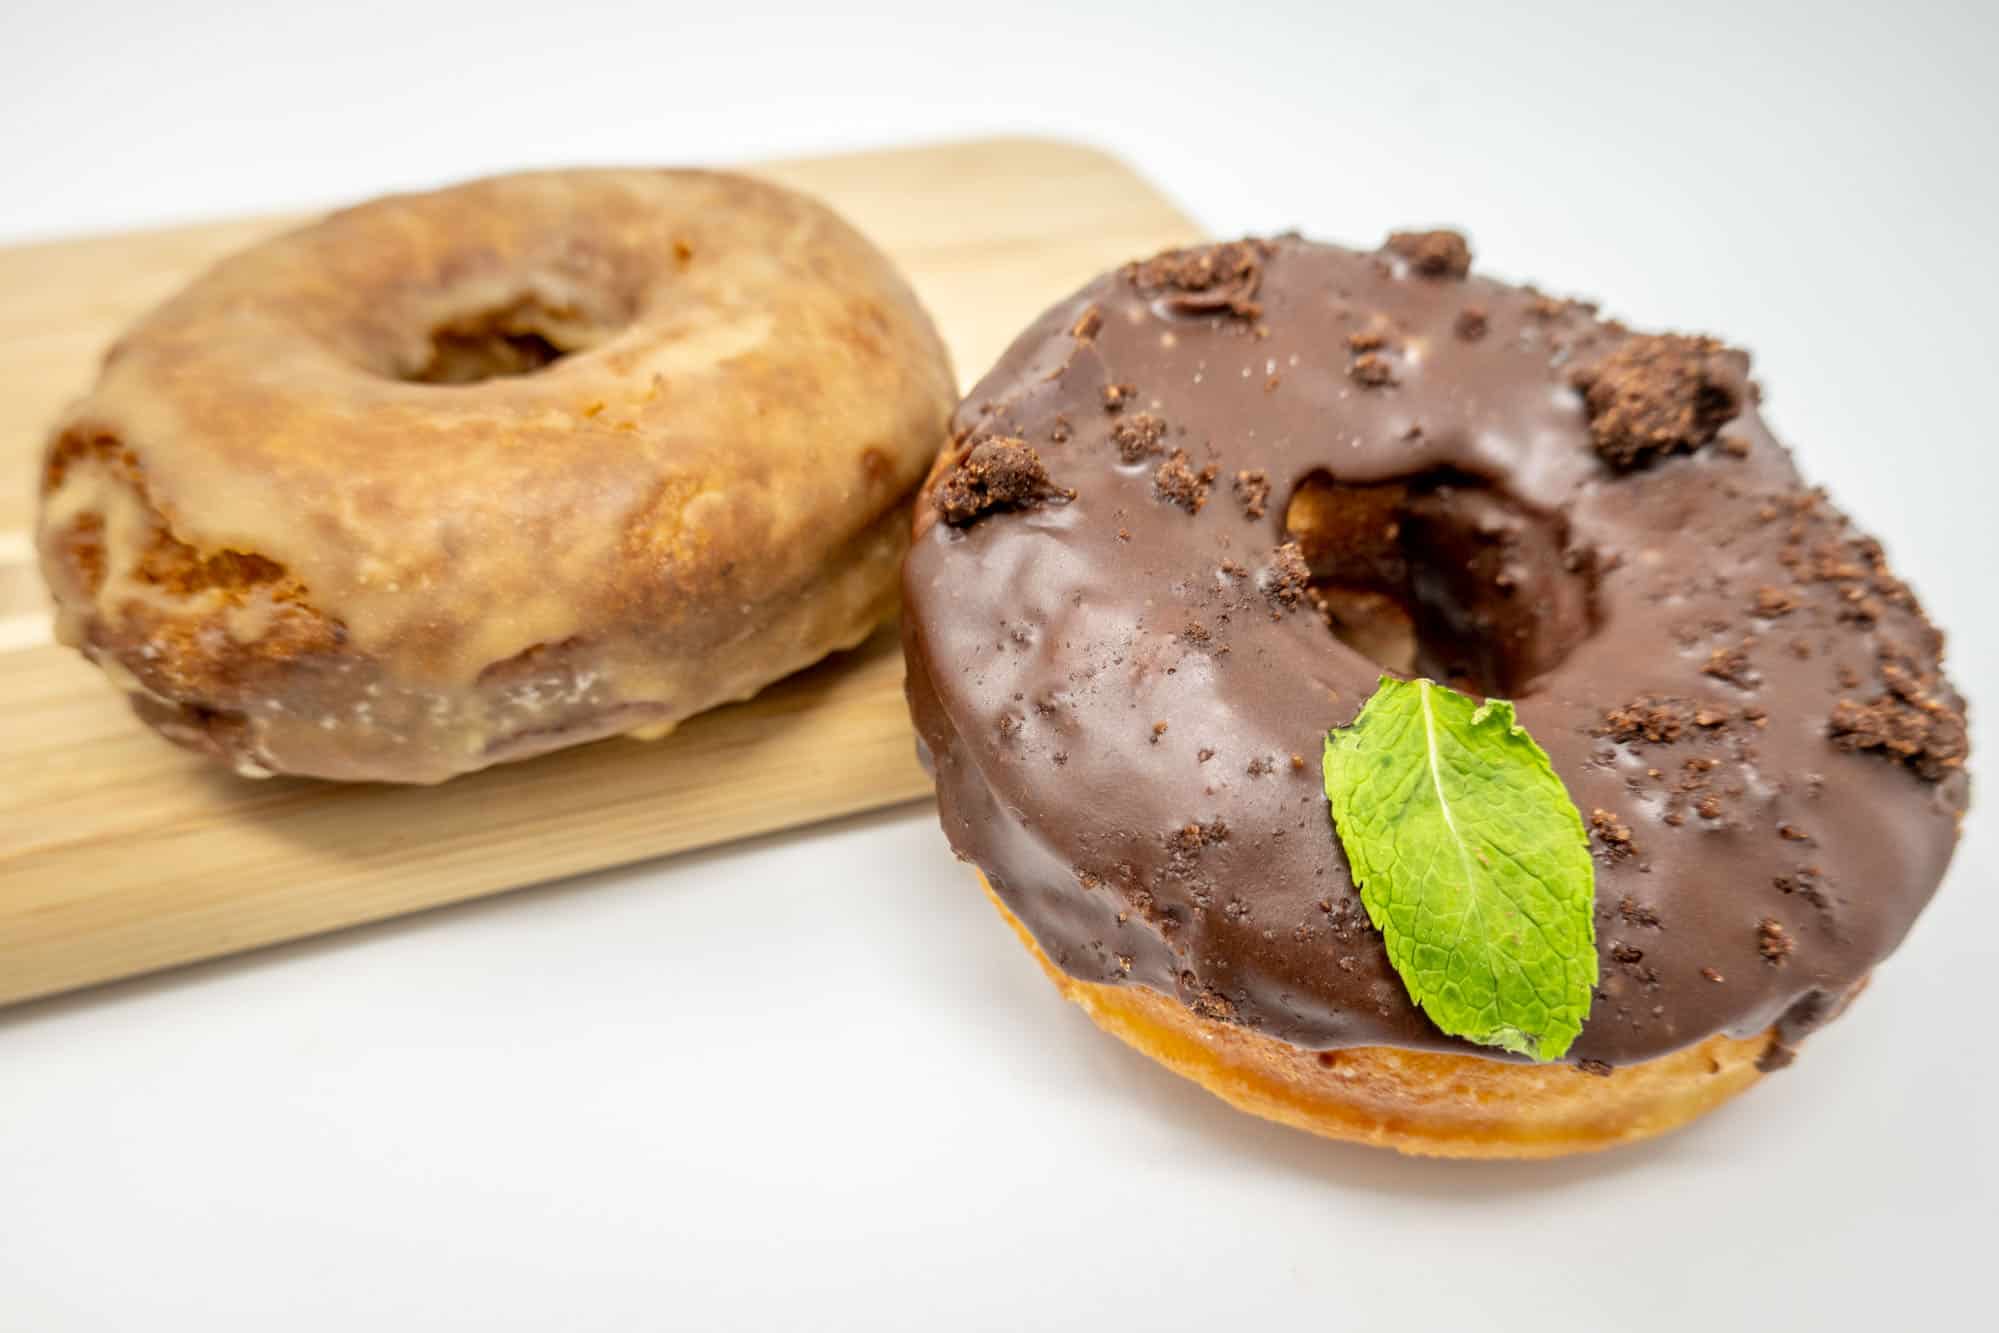 One glazed donut and one chocolate donut topped with a mint leaf